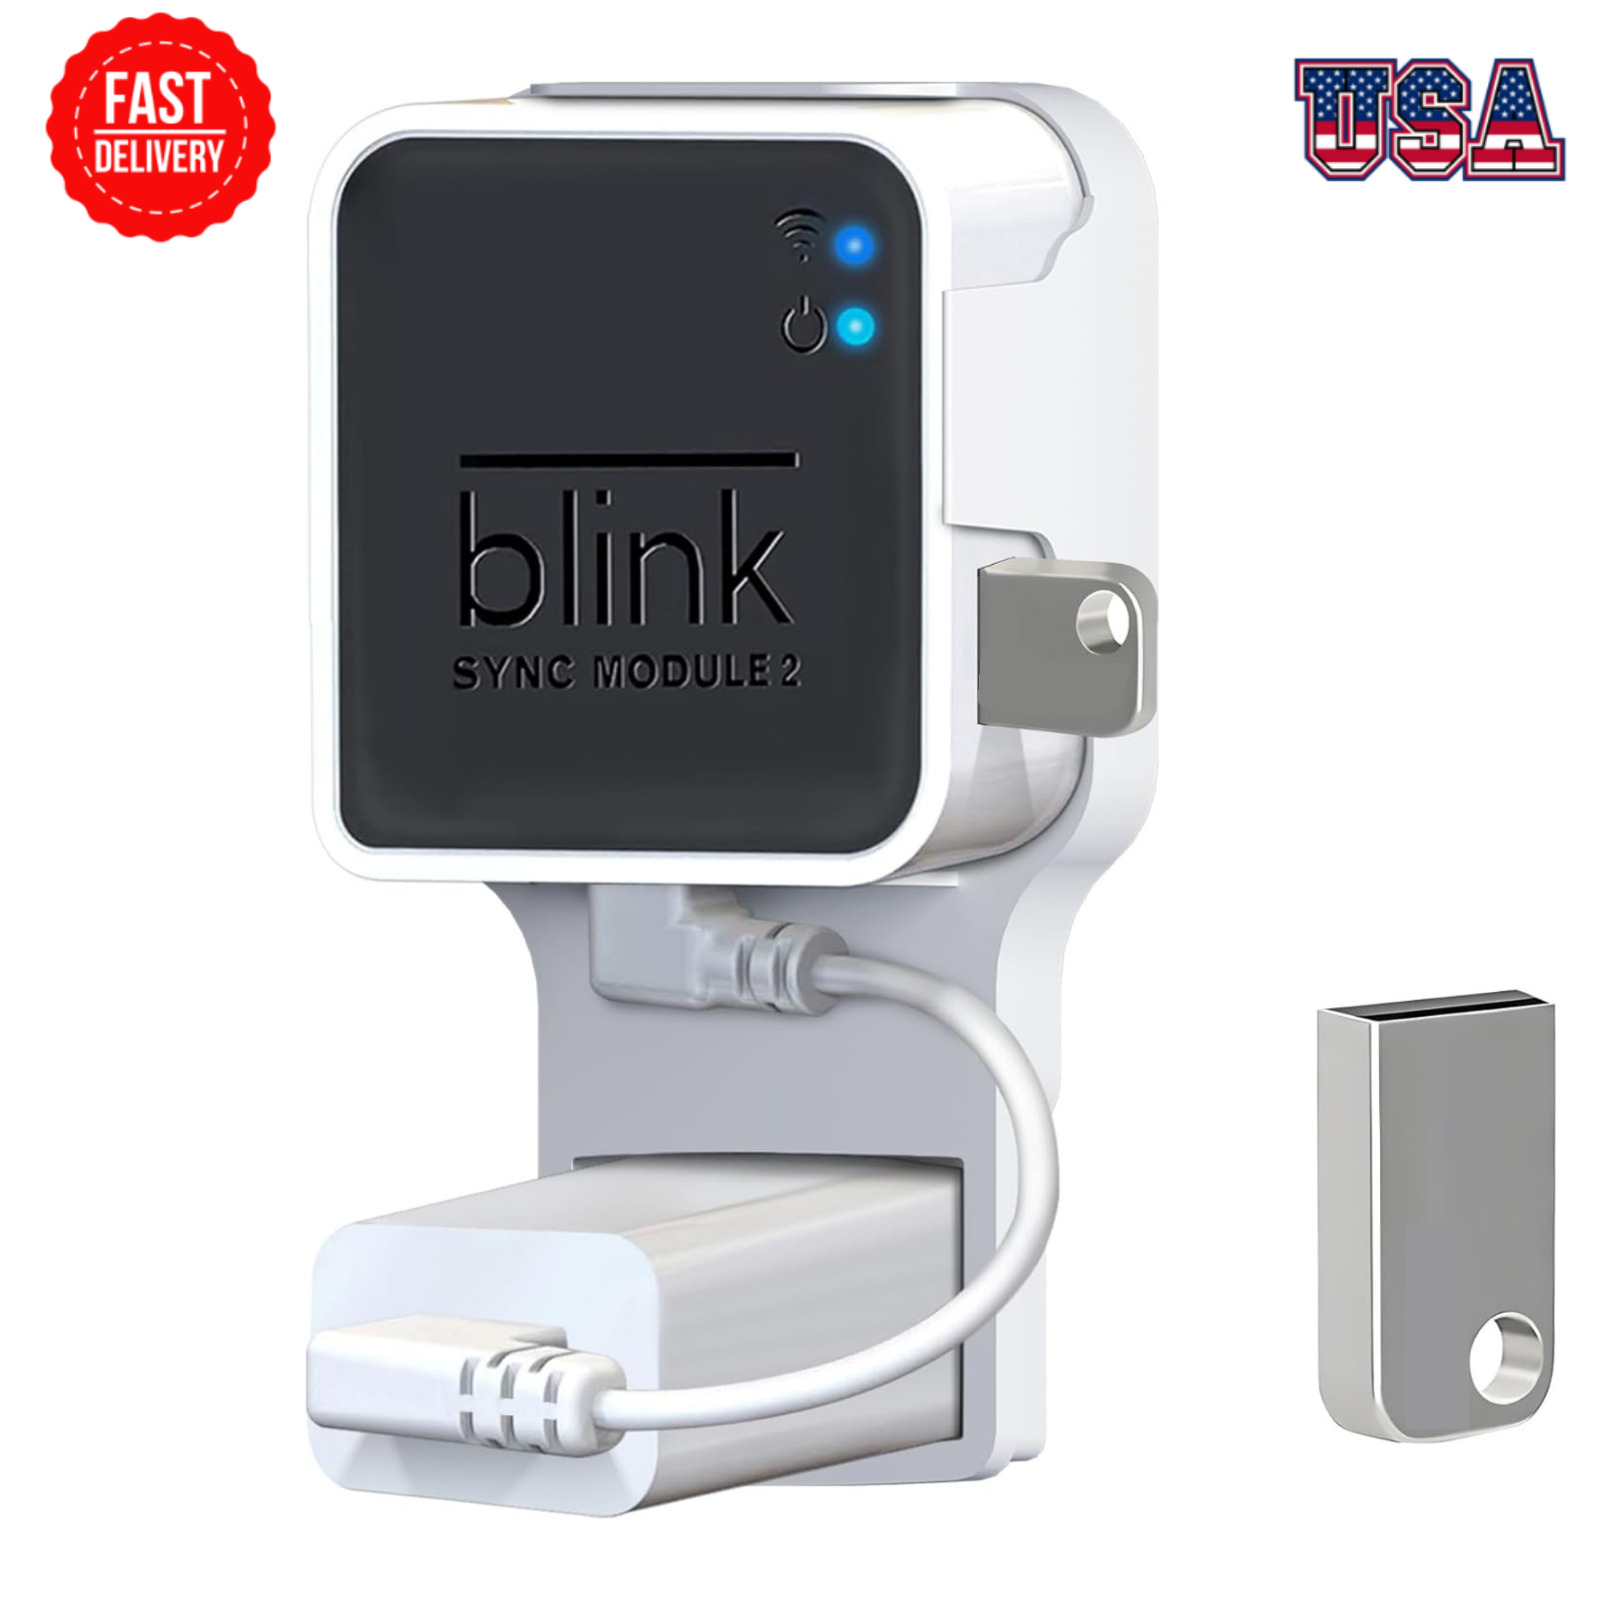 256GB USB Flash Drive And Outlet Wall Mount For Blink Sync Module 2 Save Space